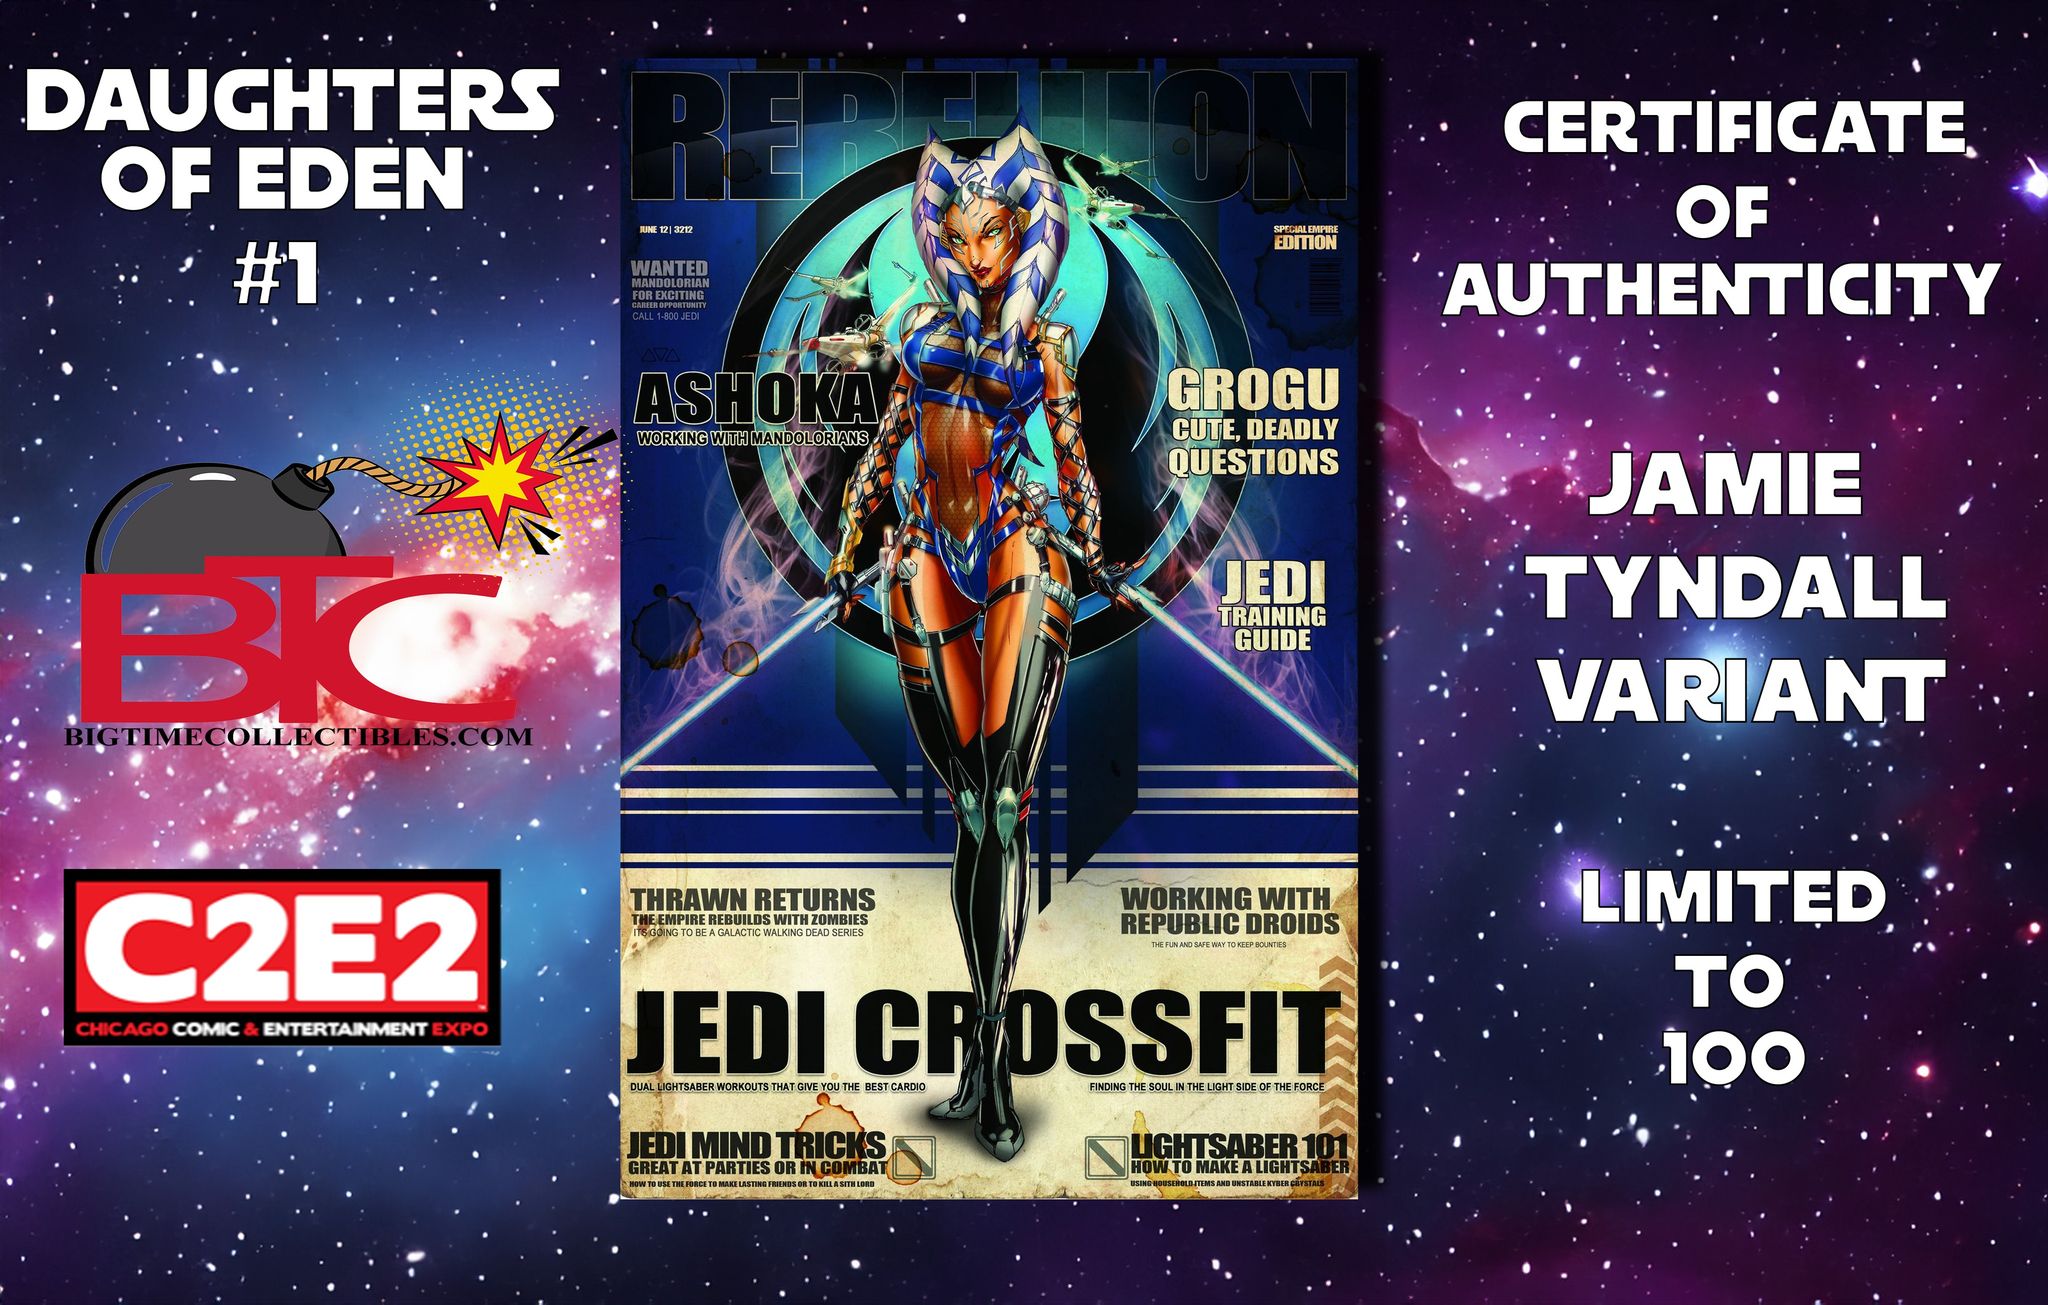 DAUGHTERS OF EDEN #1 JAMIE TYNDALL C2E2 JEDI CROSSFIT EXCLUSIVE VARIANT LIMITED TO 100 W/COA